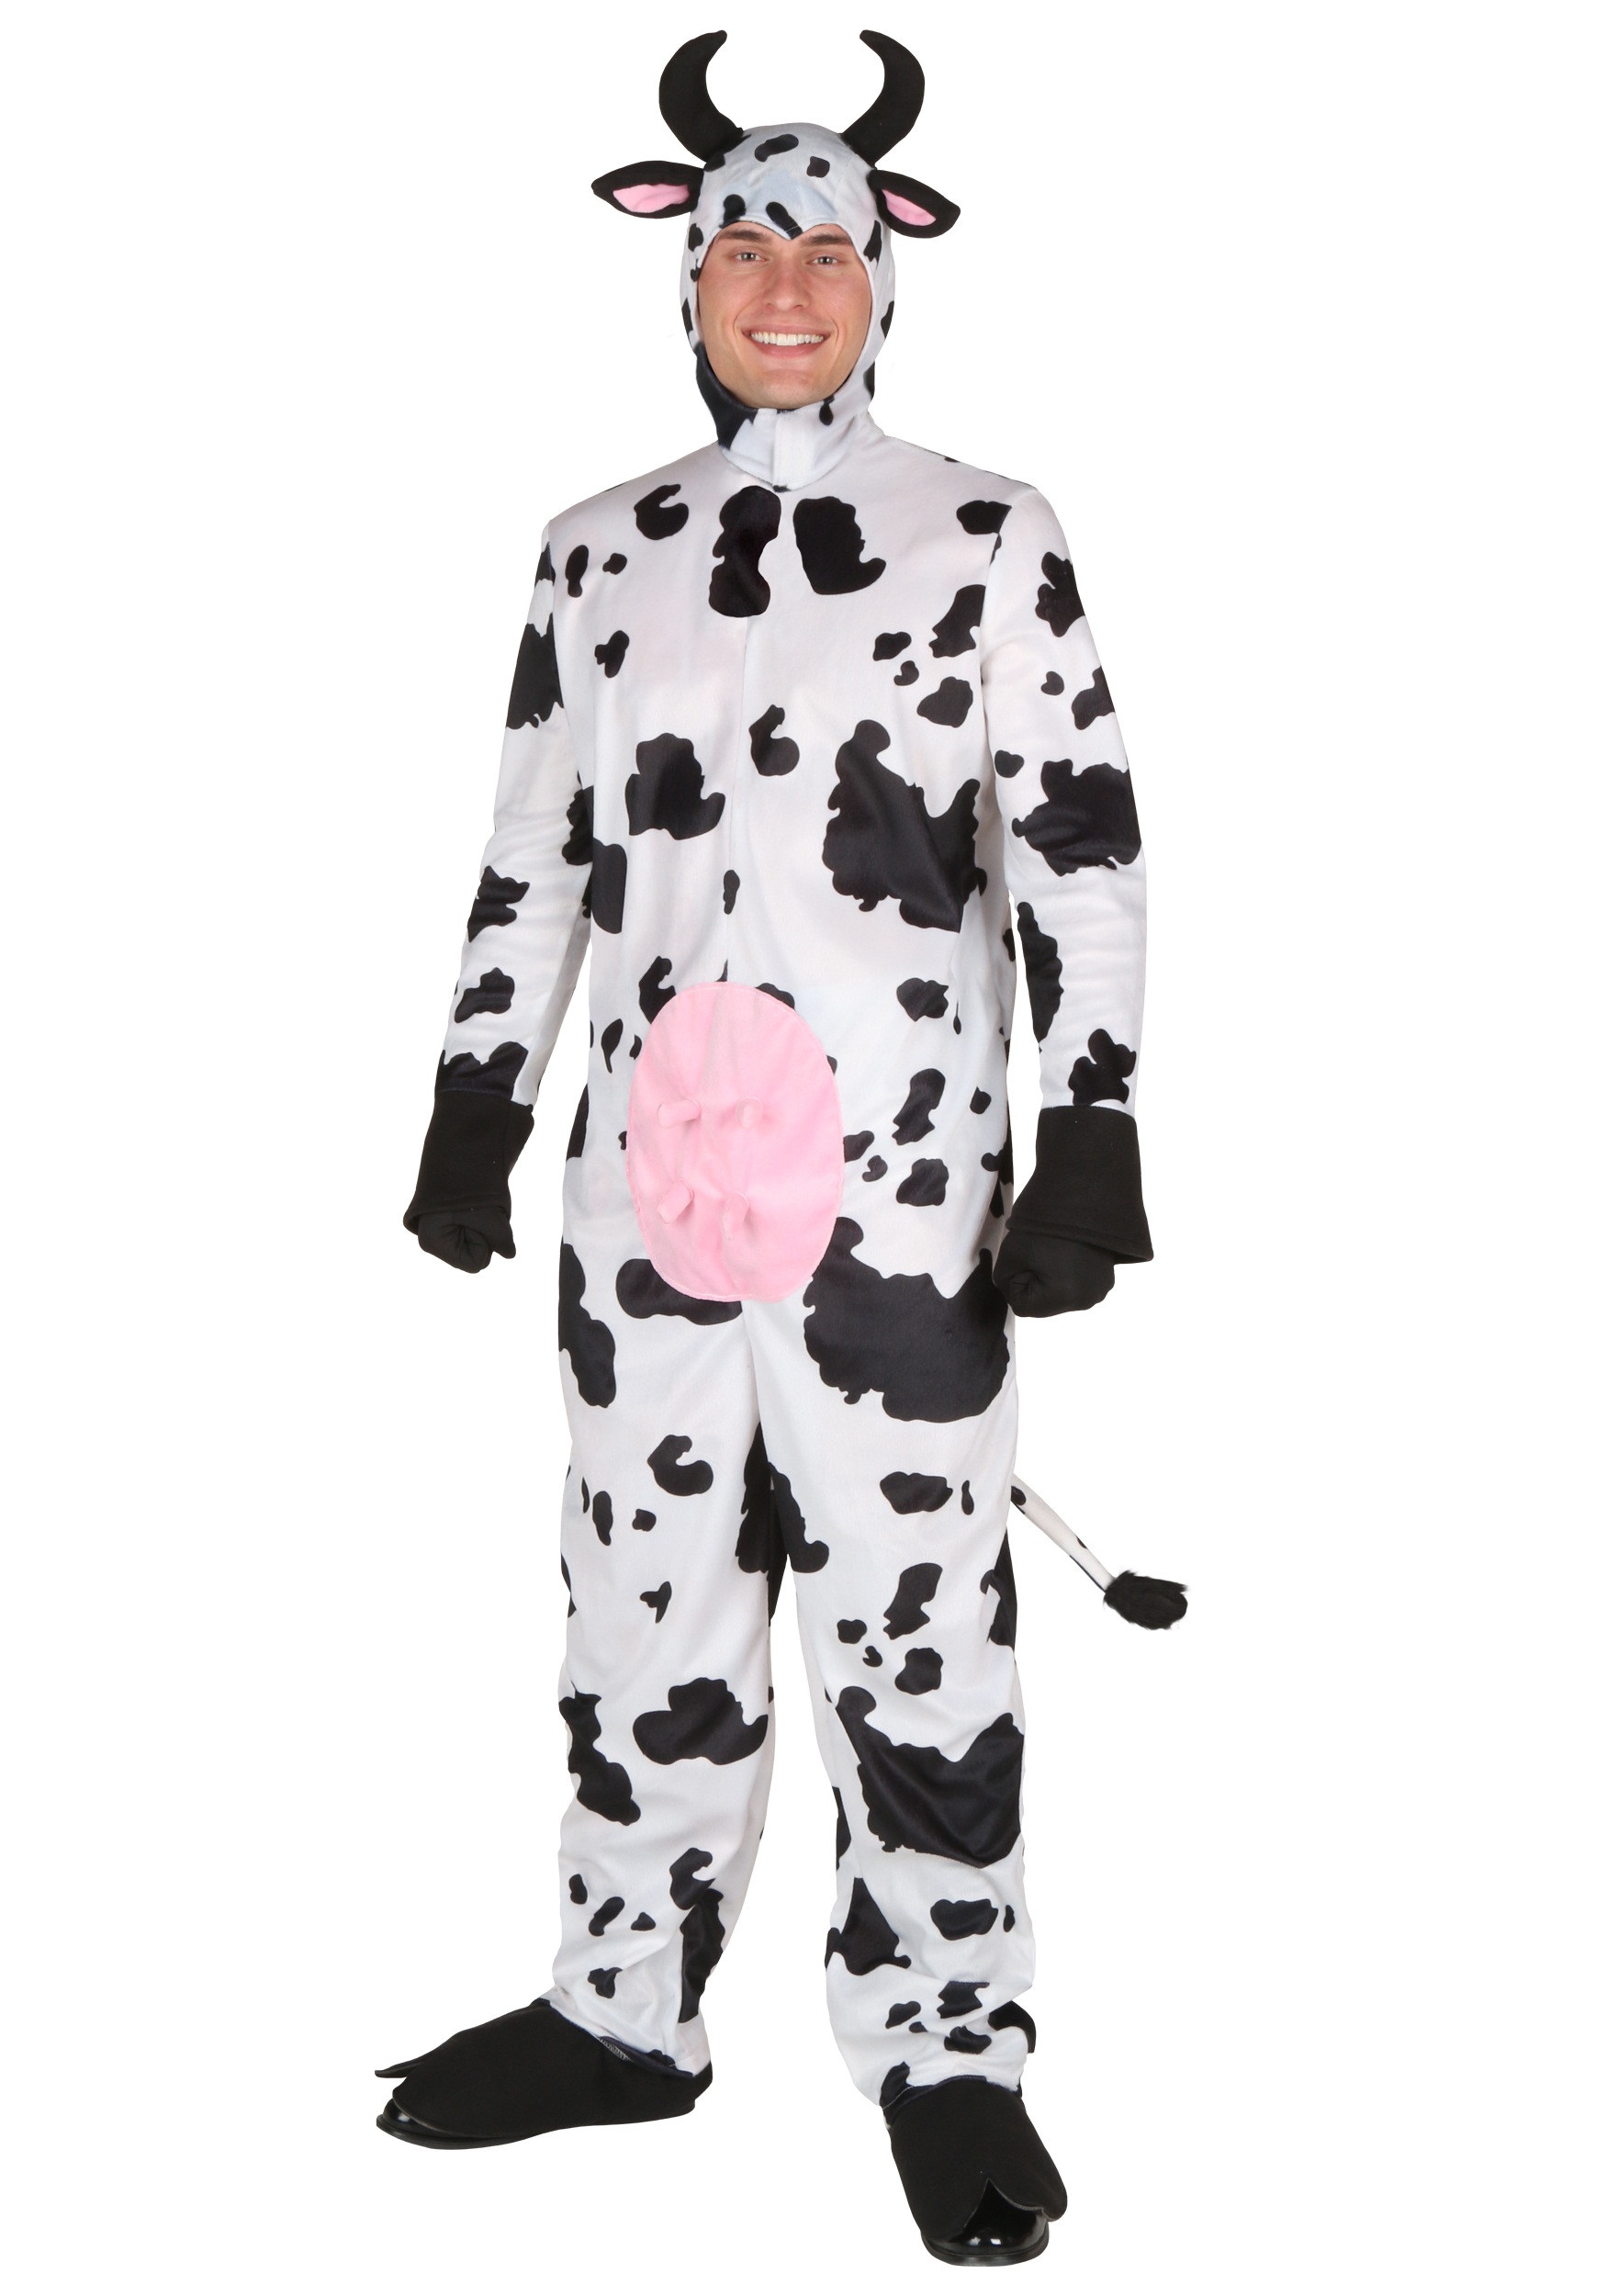 Photos - Fancy Dress Deluxe FUN Costumes  Cow Costume for Adults Black/White FUN2930AD 